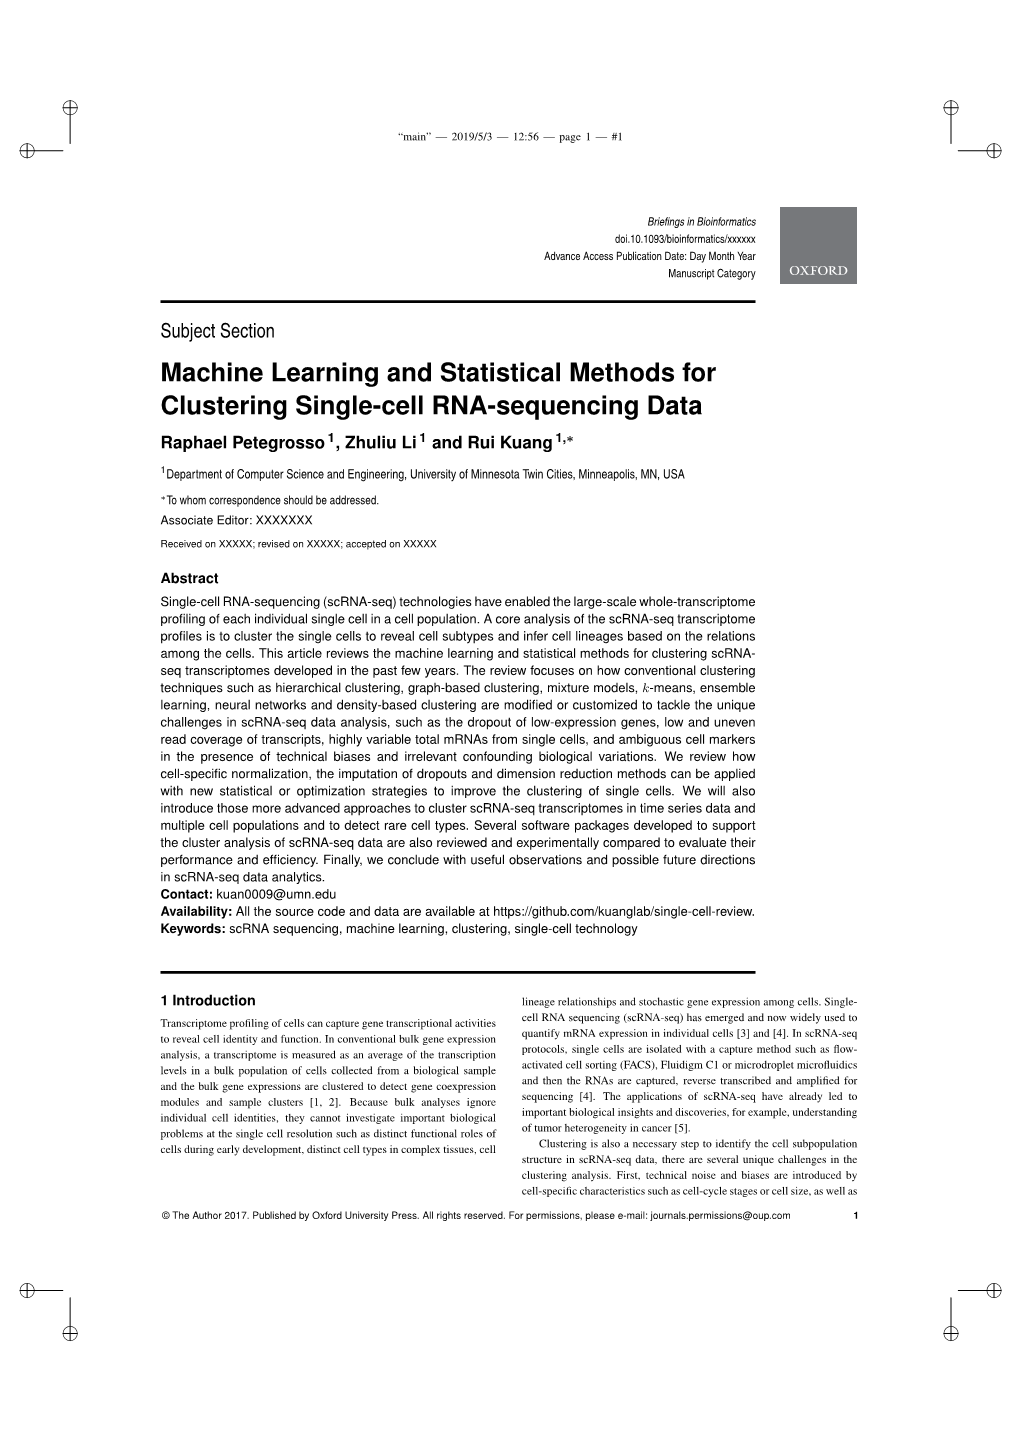 Machine Learning and Statistical Methods for Clustering Single-Cell RNA-Sequencing Data Raphael Petegrosso 1, Zhuliu Li 1 and Rui Kuang 1,∗